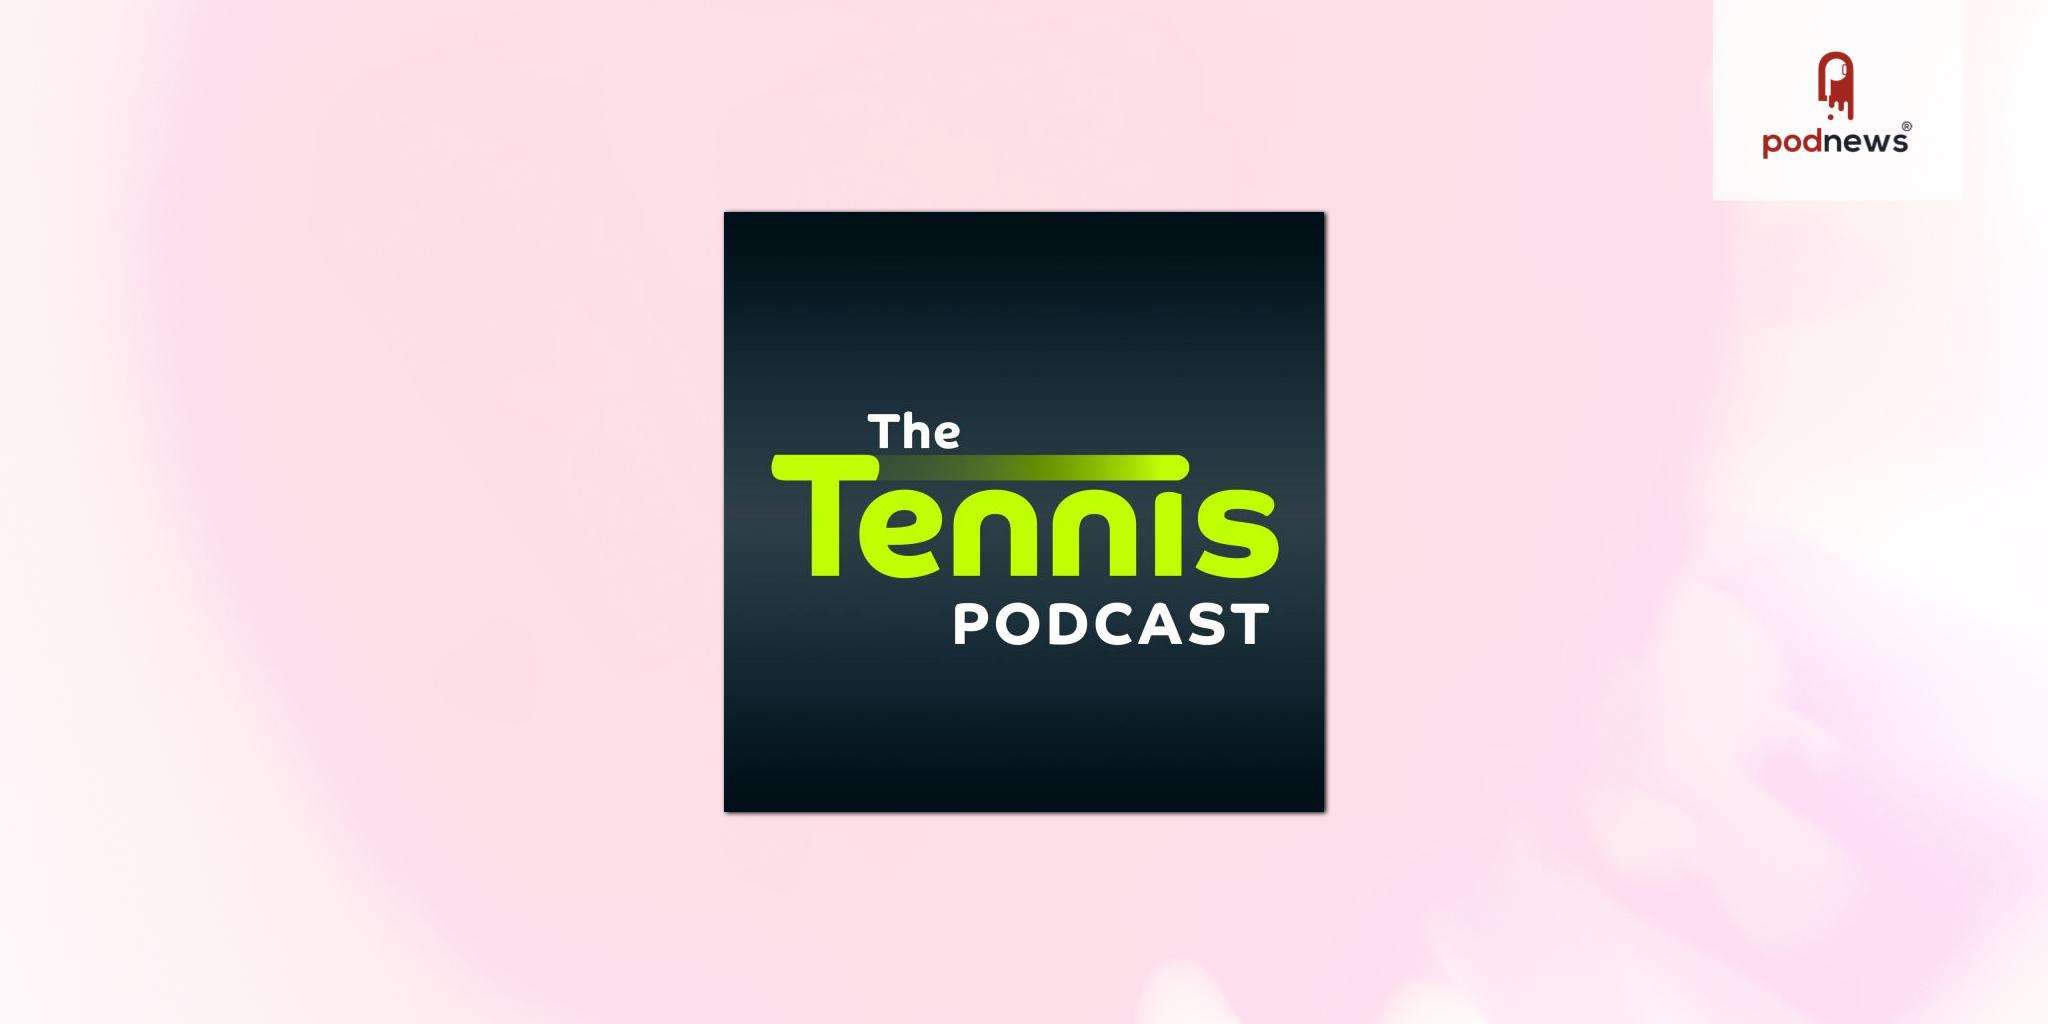 The Tennis Podcast to be represented by Billie Jean King Enterprises